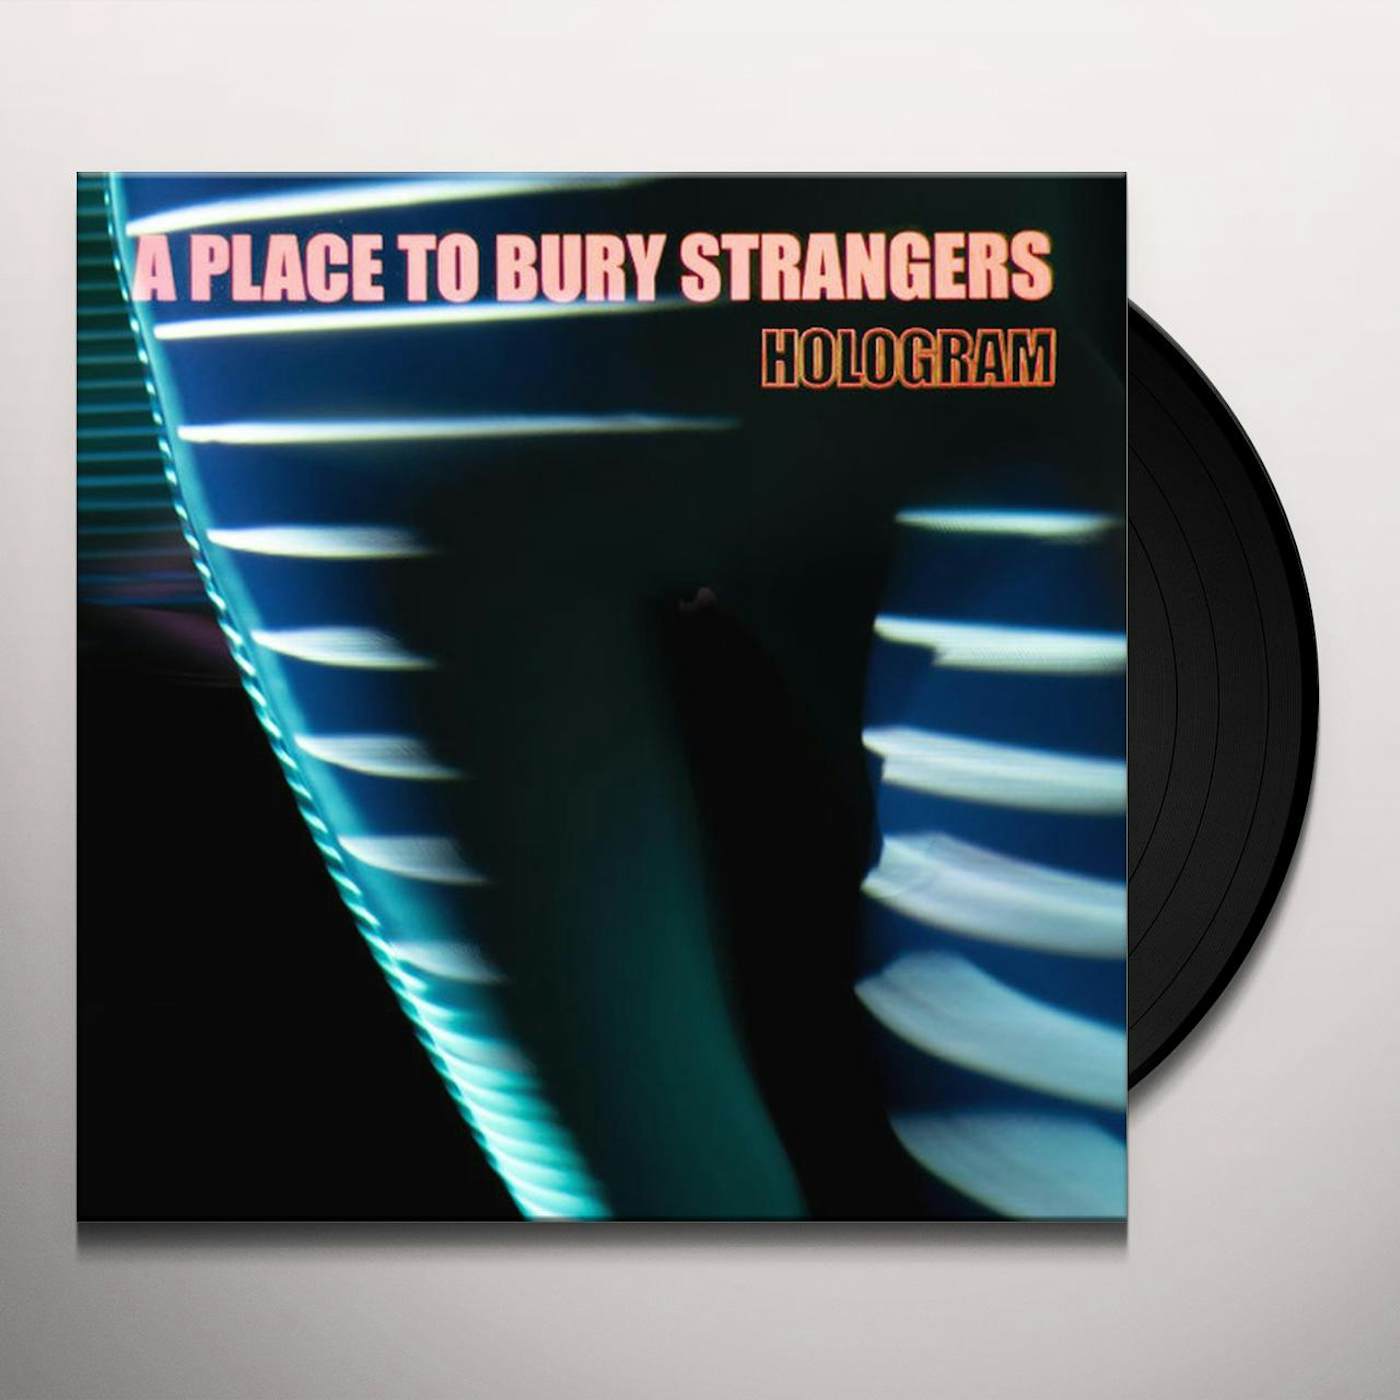 A Place To Bury Strangers Hologram Vinyl Record